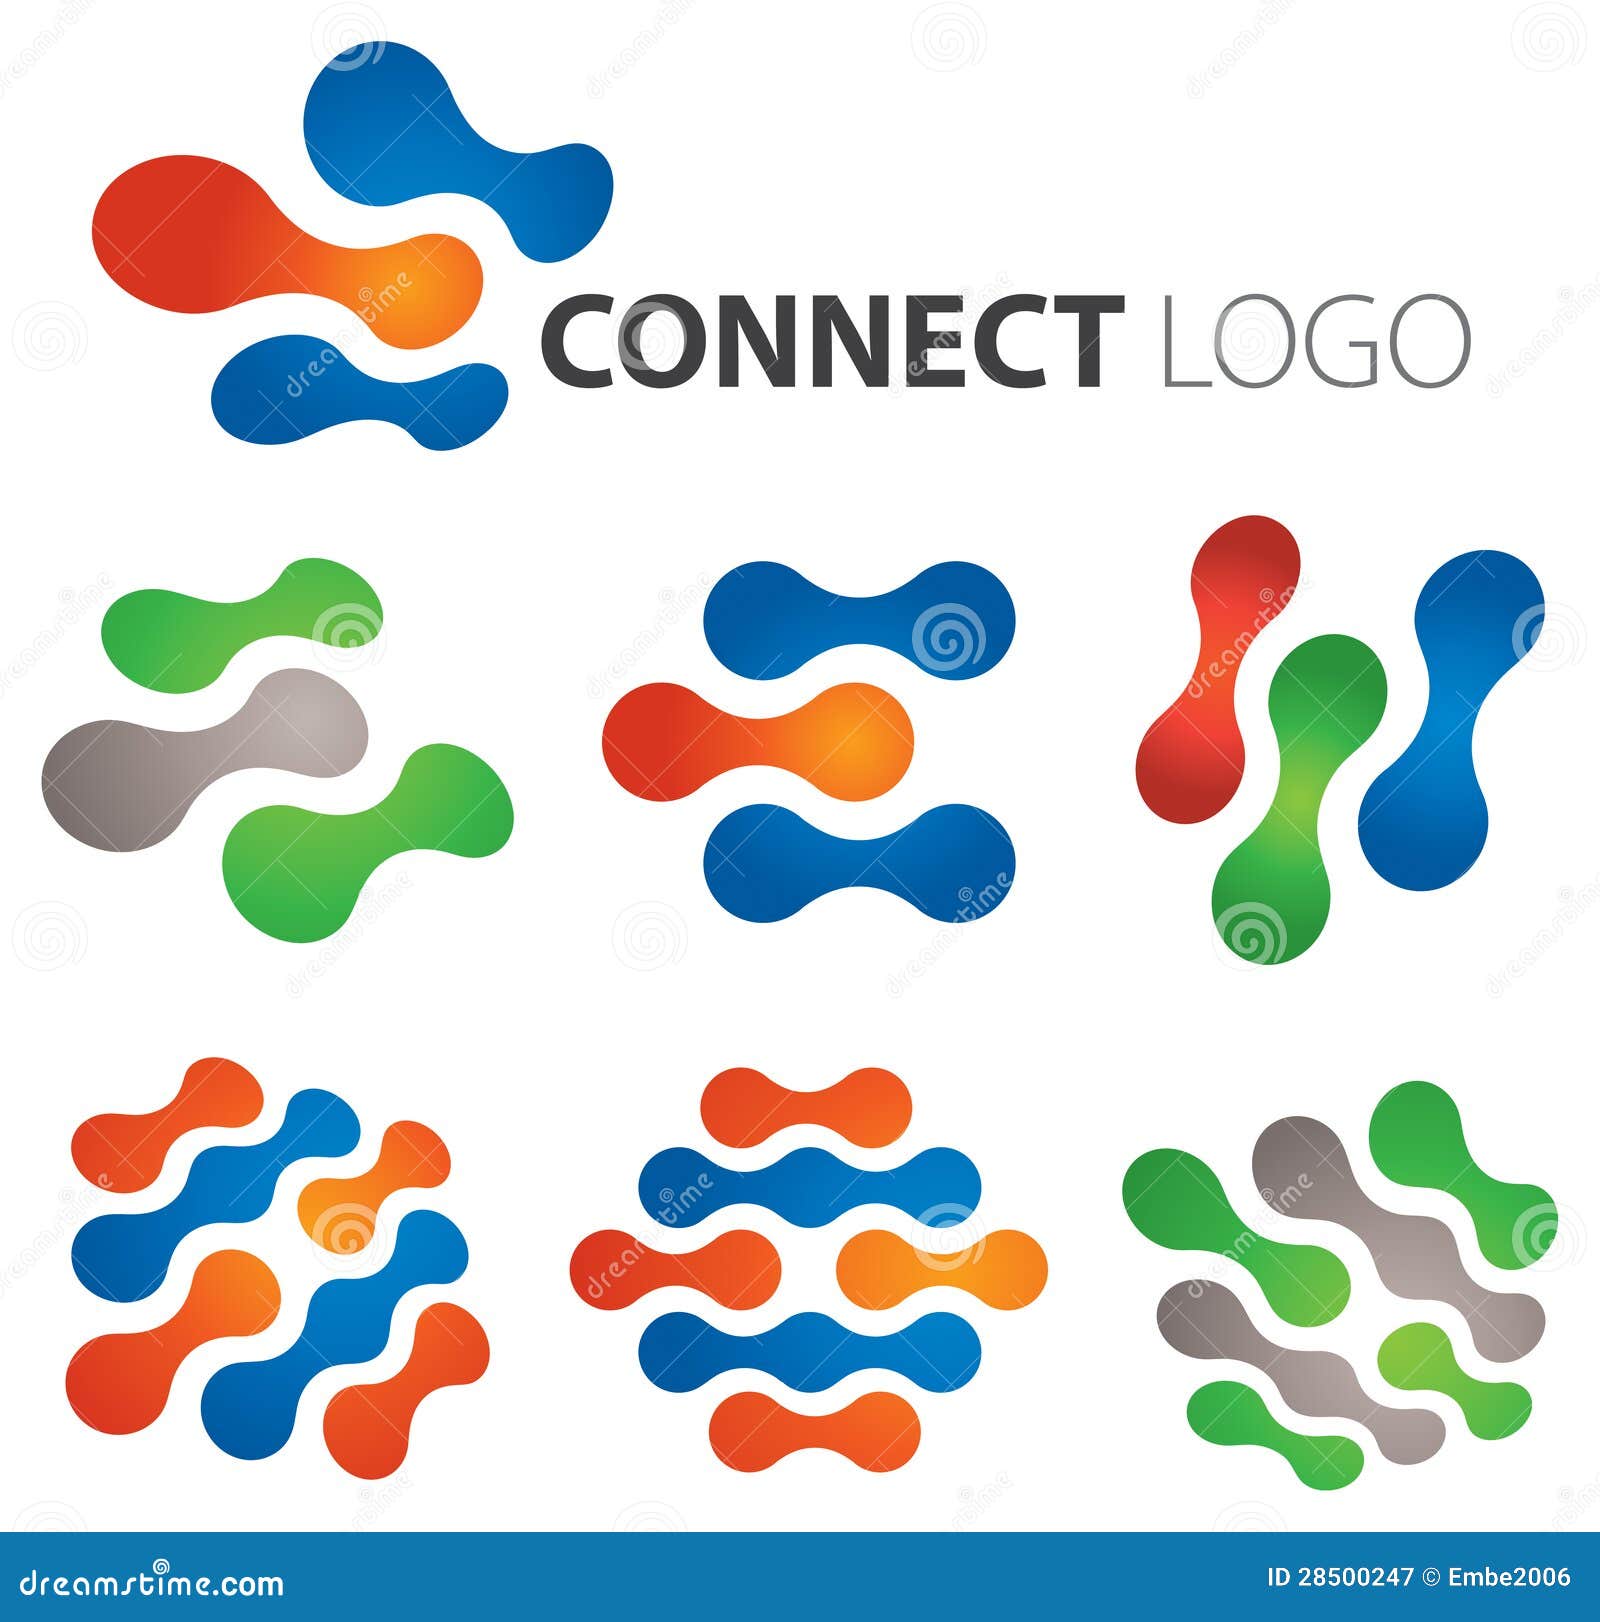 Connect Logo stock vector. Illustration of corporate - 28500247